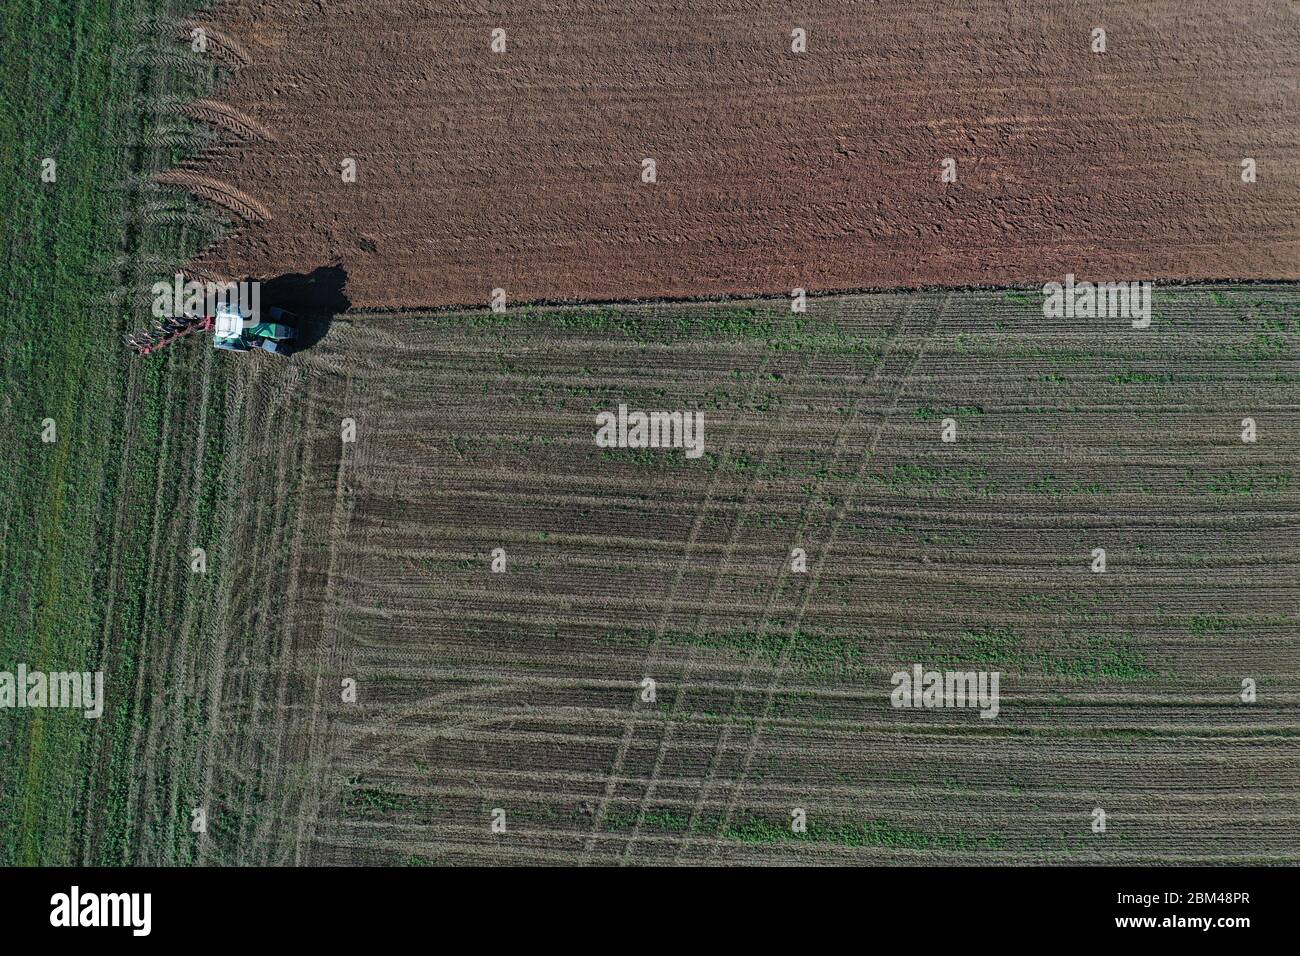 Tractor ploughing farm field in summer end, aerial view Stock Photo